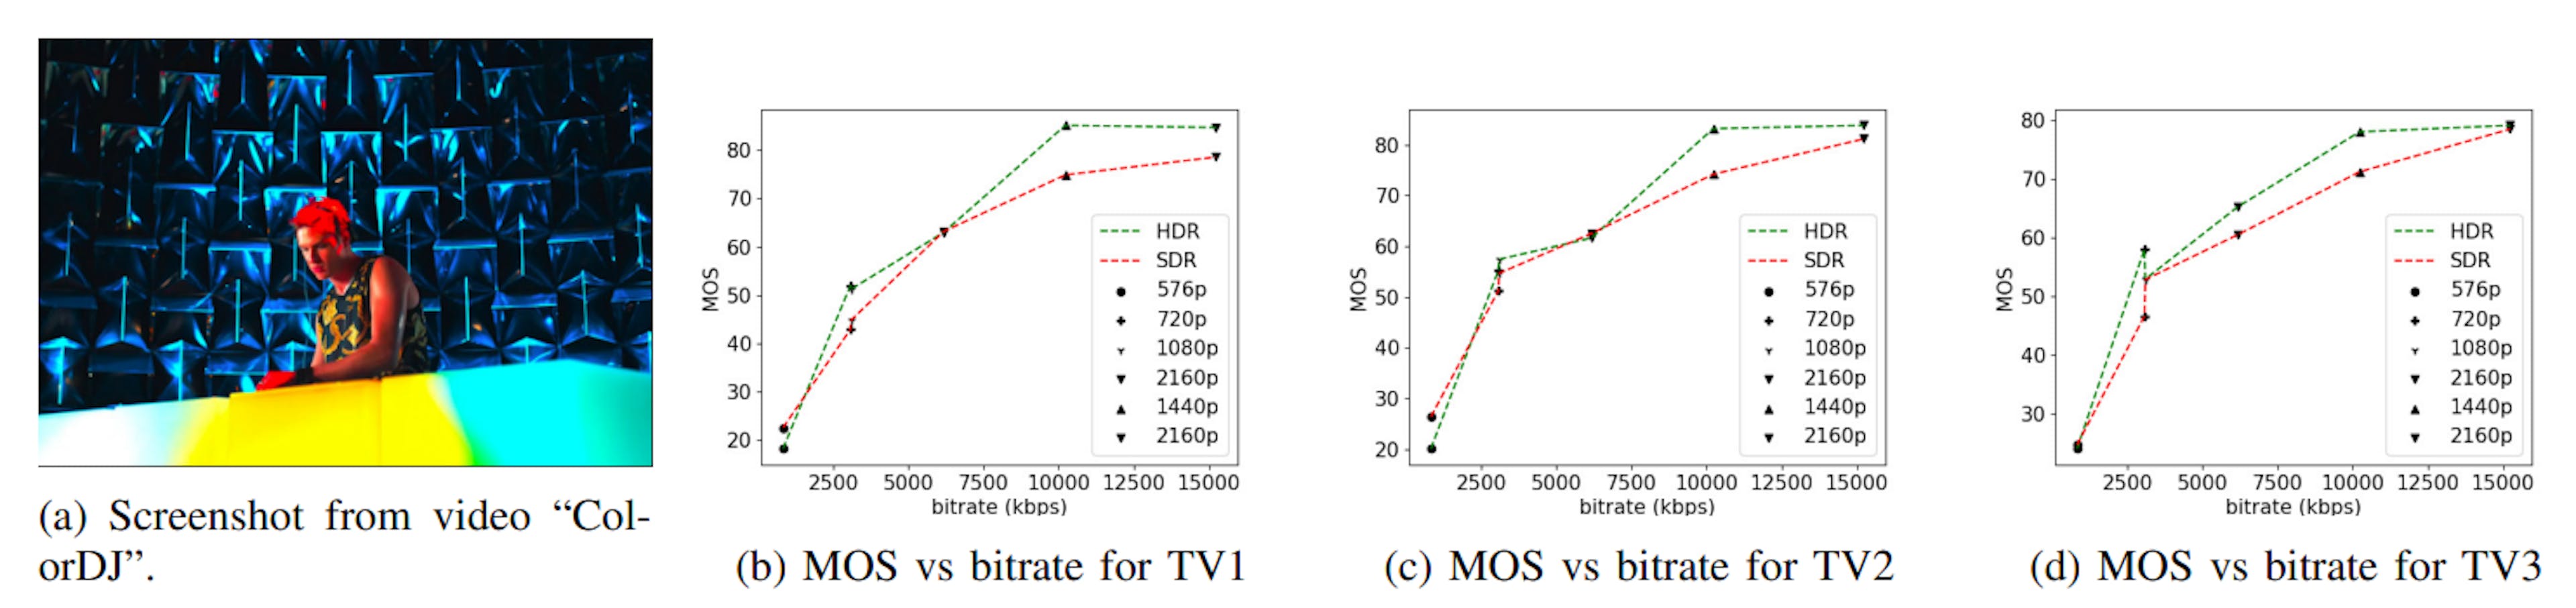 Fig. 4: MOS vs bitrate plots for the three tested televisions on the “ColorDJ” video.